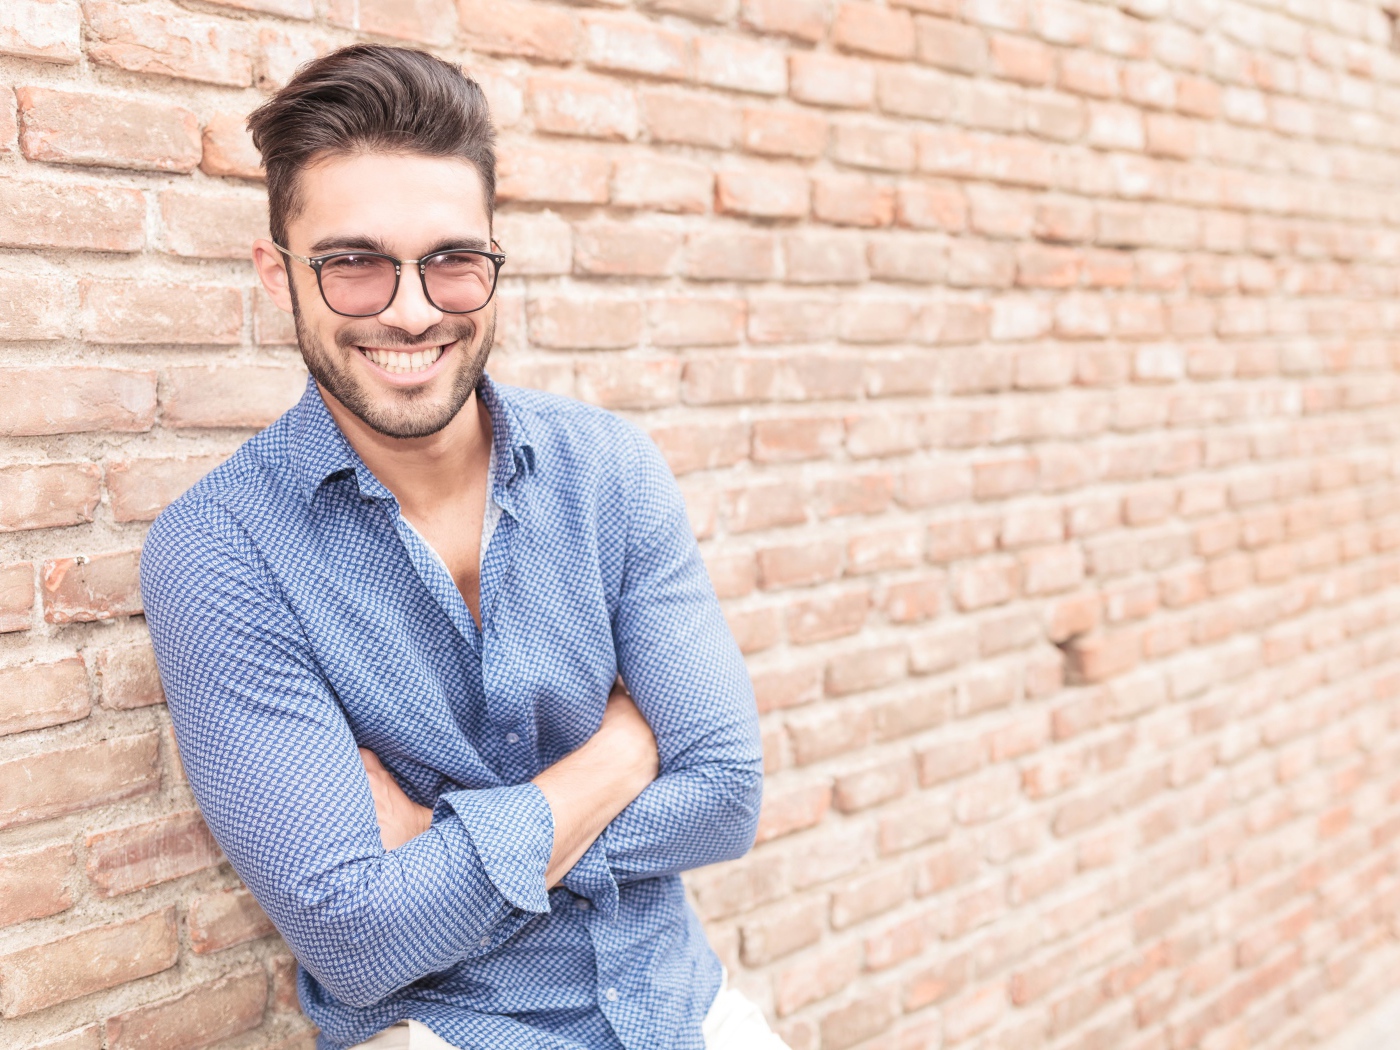 Smiling man with glasses standing against the wall